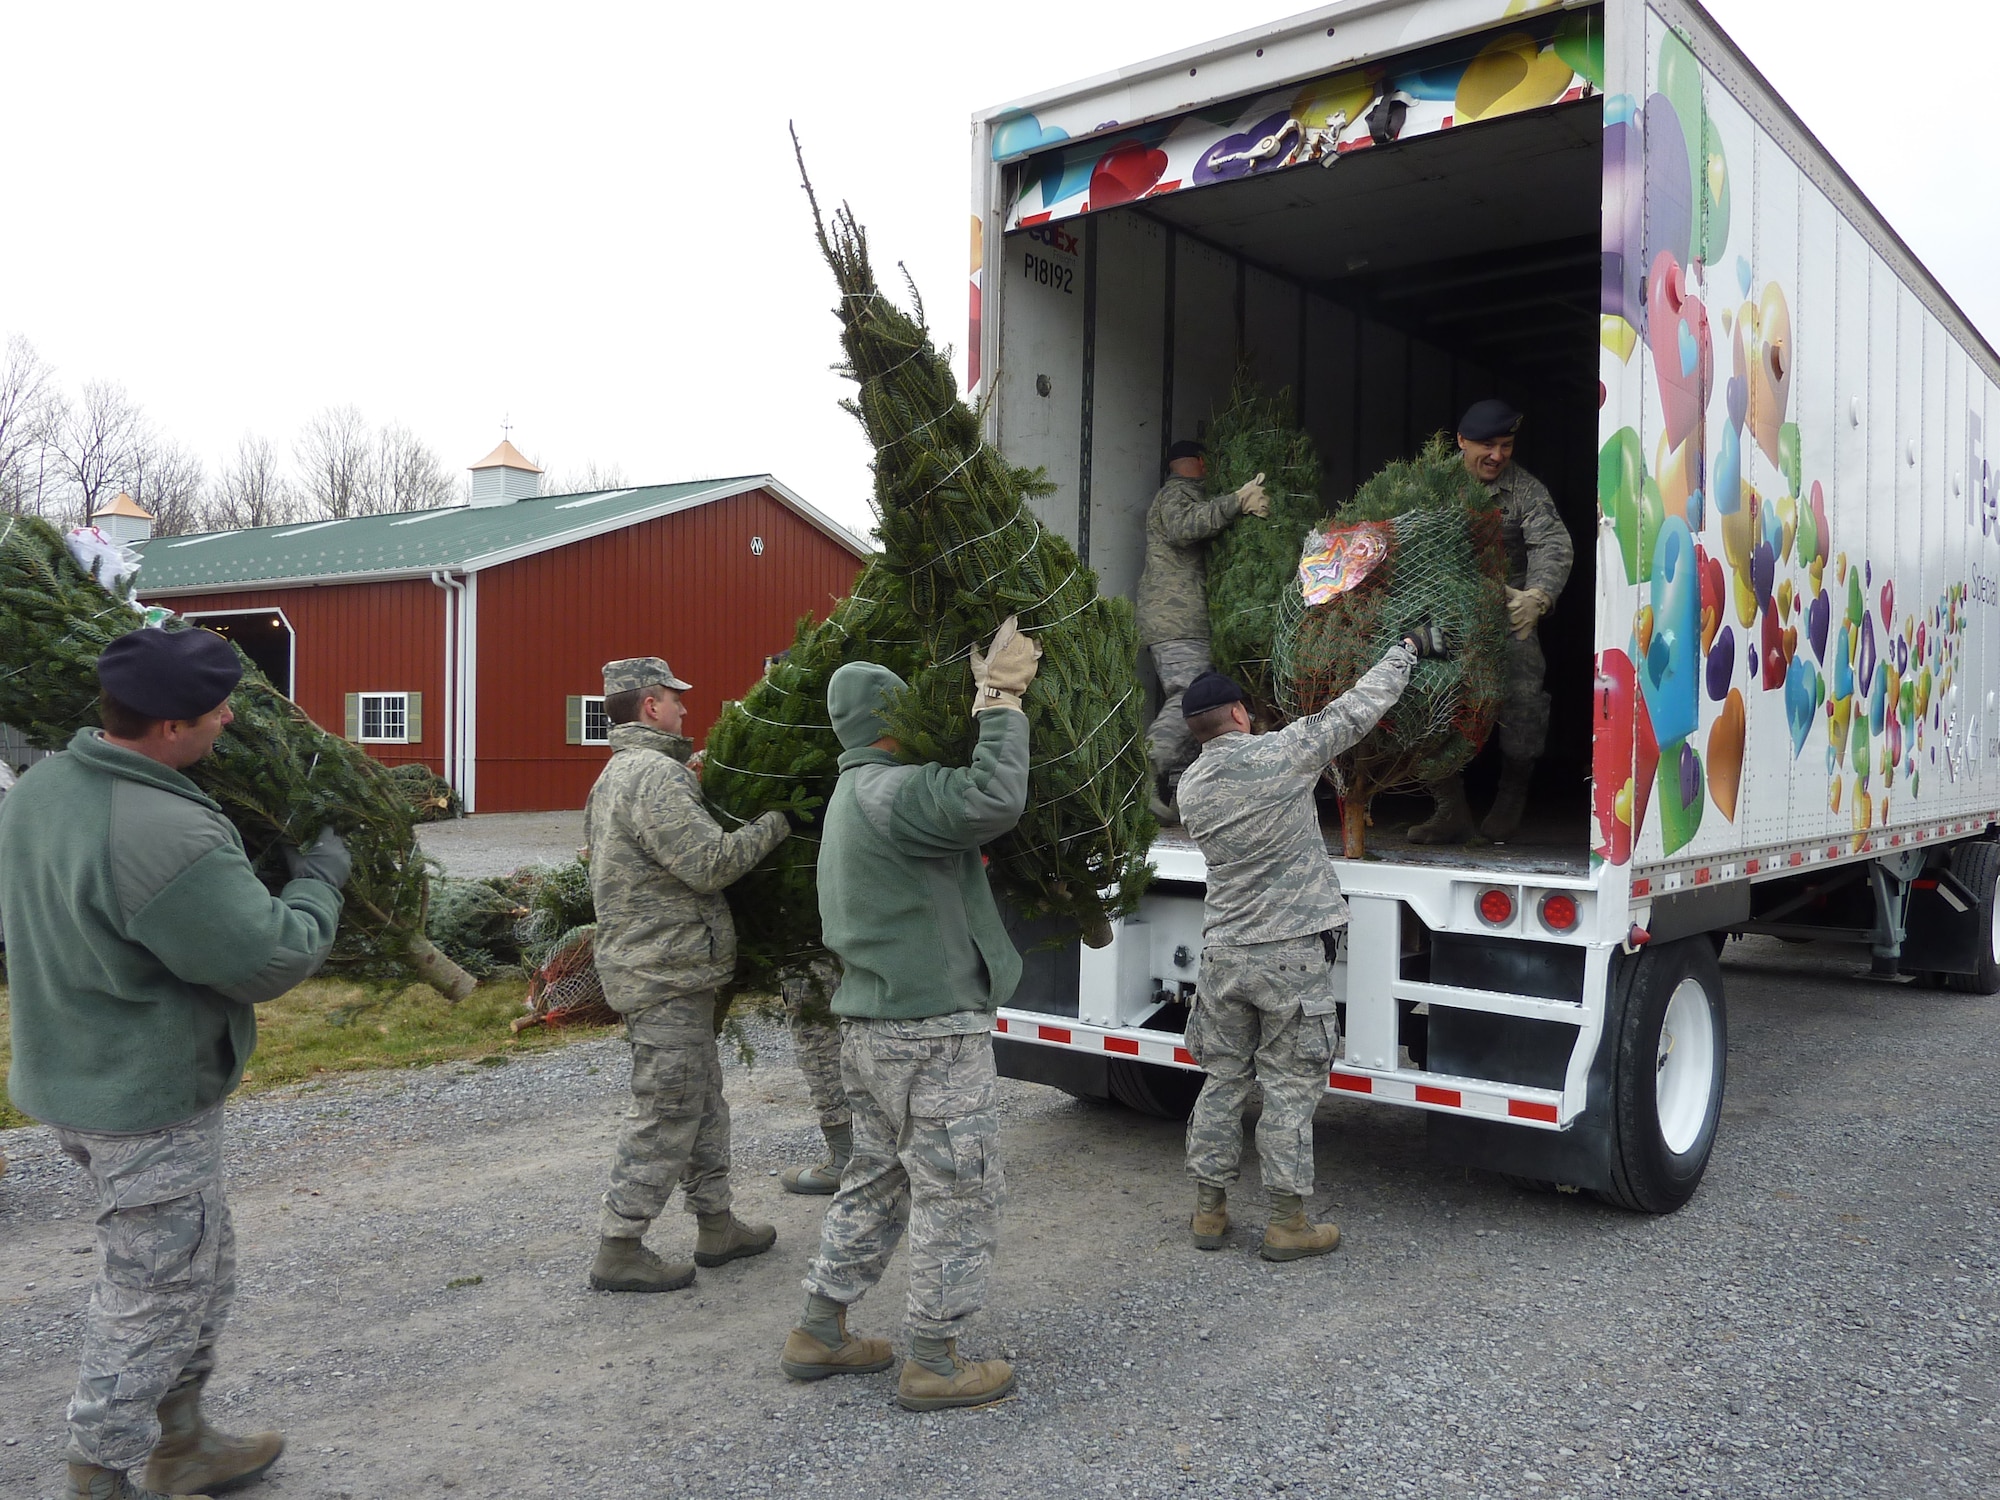 BALLSTON SPA, N.Y. -- New York Air National Guard members of the 109th Airlift Wing from Scotia, N.Y. volunteer their time to assist FedEx driver Don Pelletier load Christmas Trees here at Ellms Christmas Tree Farm Dec. 7. Nearly 20 Airmen volunteered to assist in the annual "Trees for Troops" loading of about 150 donated trees bound for military installations and families around the country and the globe. U.S. Air Force photo by 2nd Lt. Colette Martin, 109th Airlift Wing, New York Air National Guard. (RELEASED)